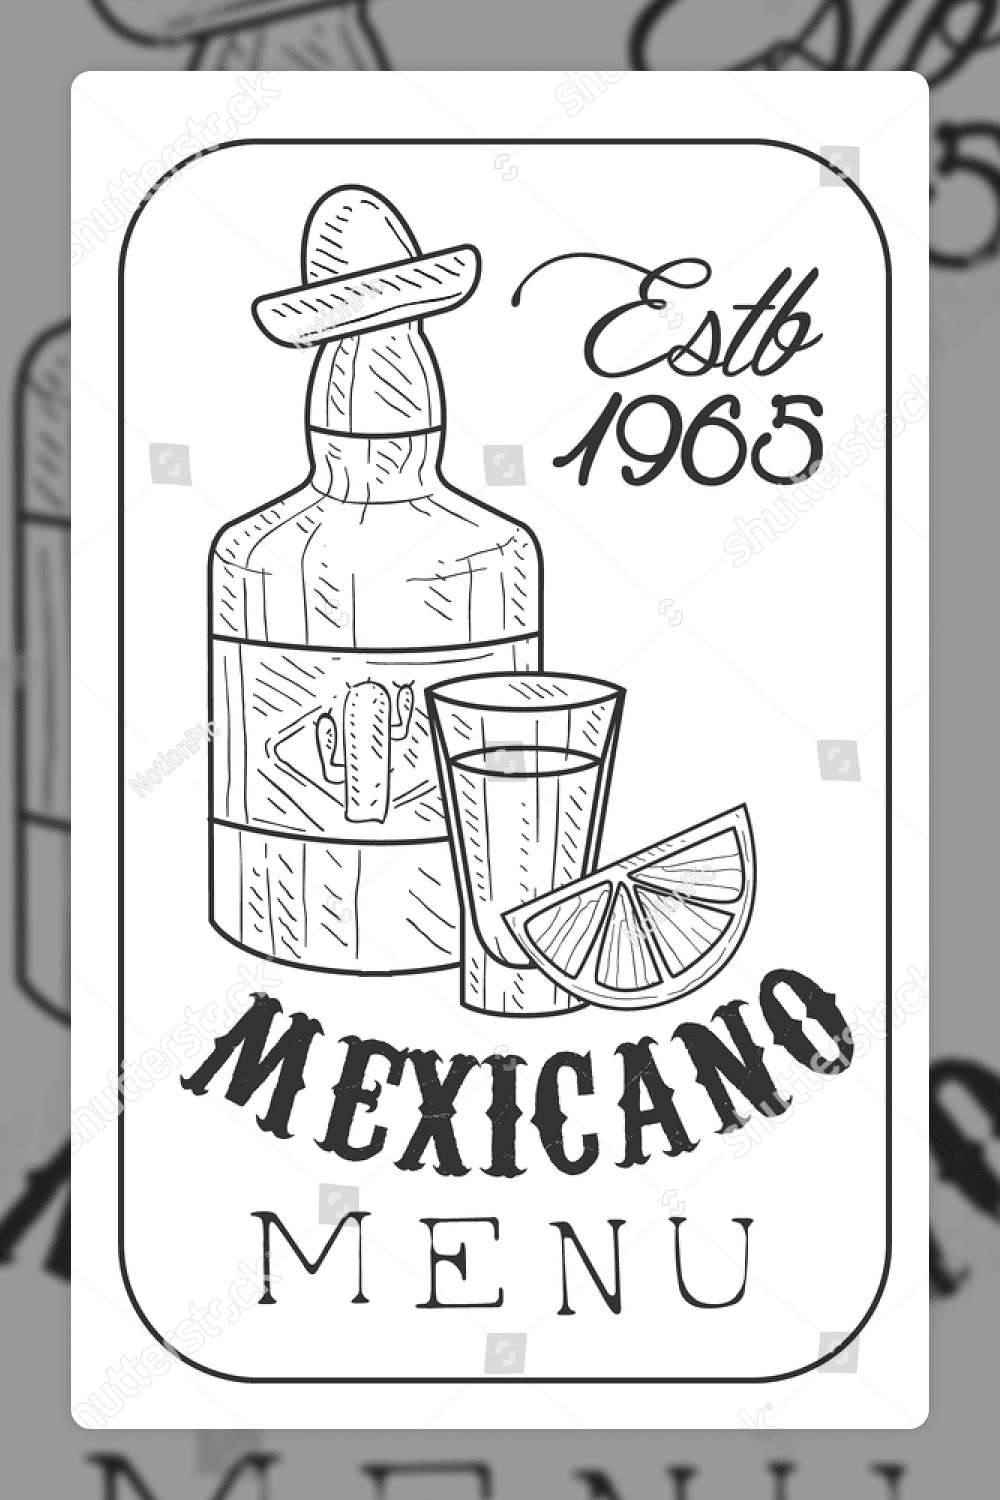 Restaurant Mexican Food Menu Promo Sign In Sketch Style With Tequila Bottle And Establishment Date In Square Frame.